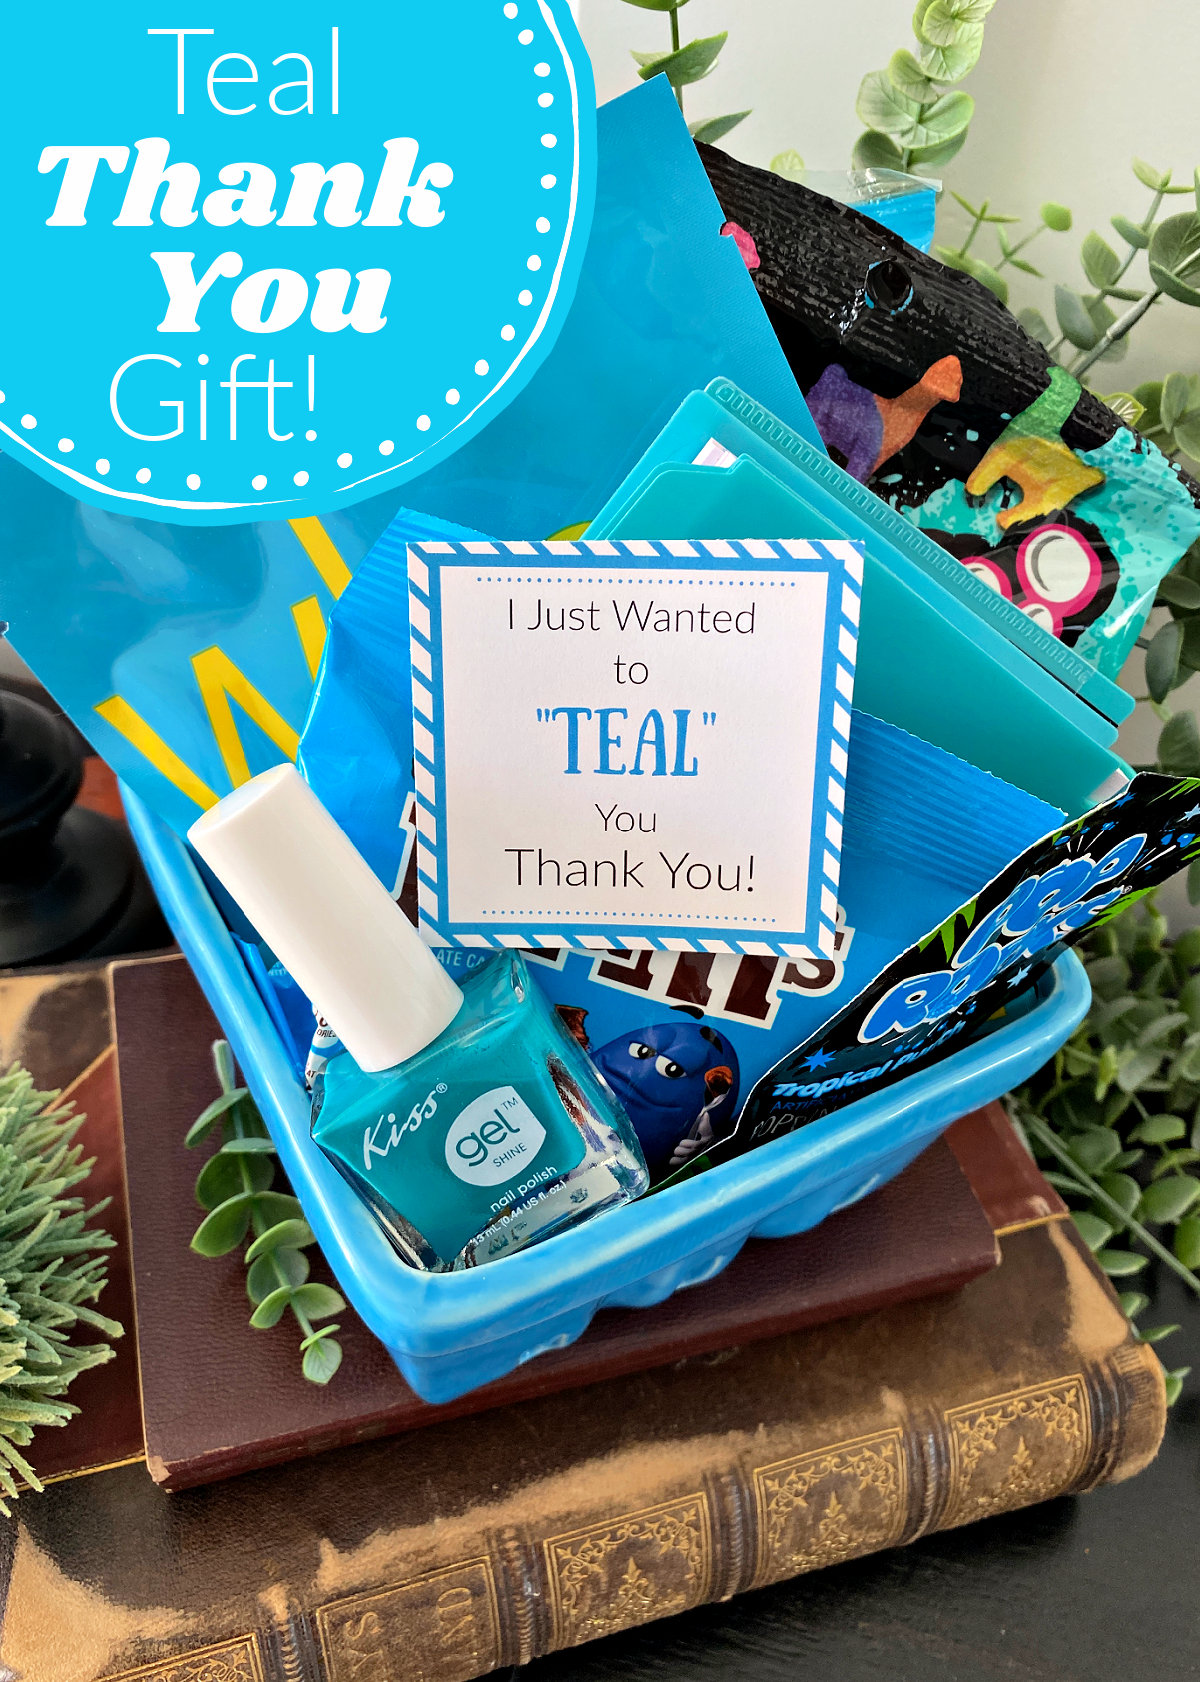 Adorable Thank You Gift. This teal themed thank you gift is the perfect way to say thank you! It's a fun and simple gift. #thankyougift #thankyou #funthankyougift #Thankyougiftidea